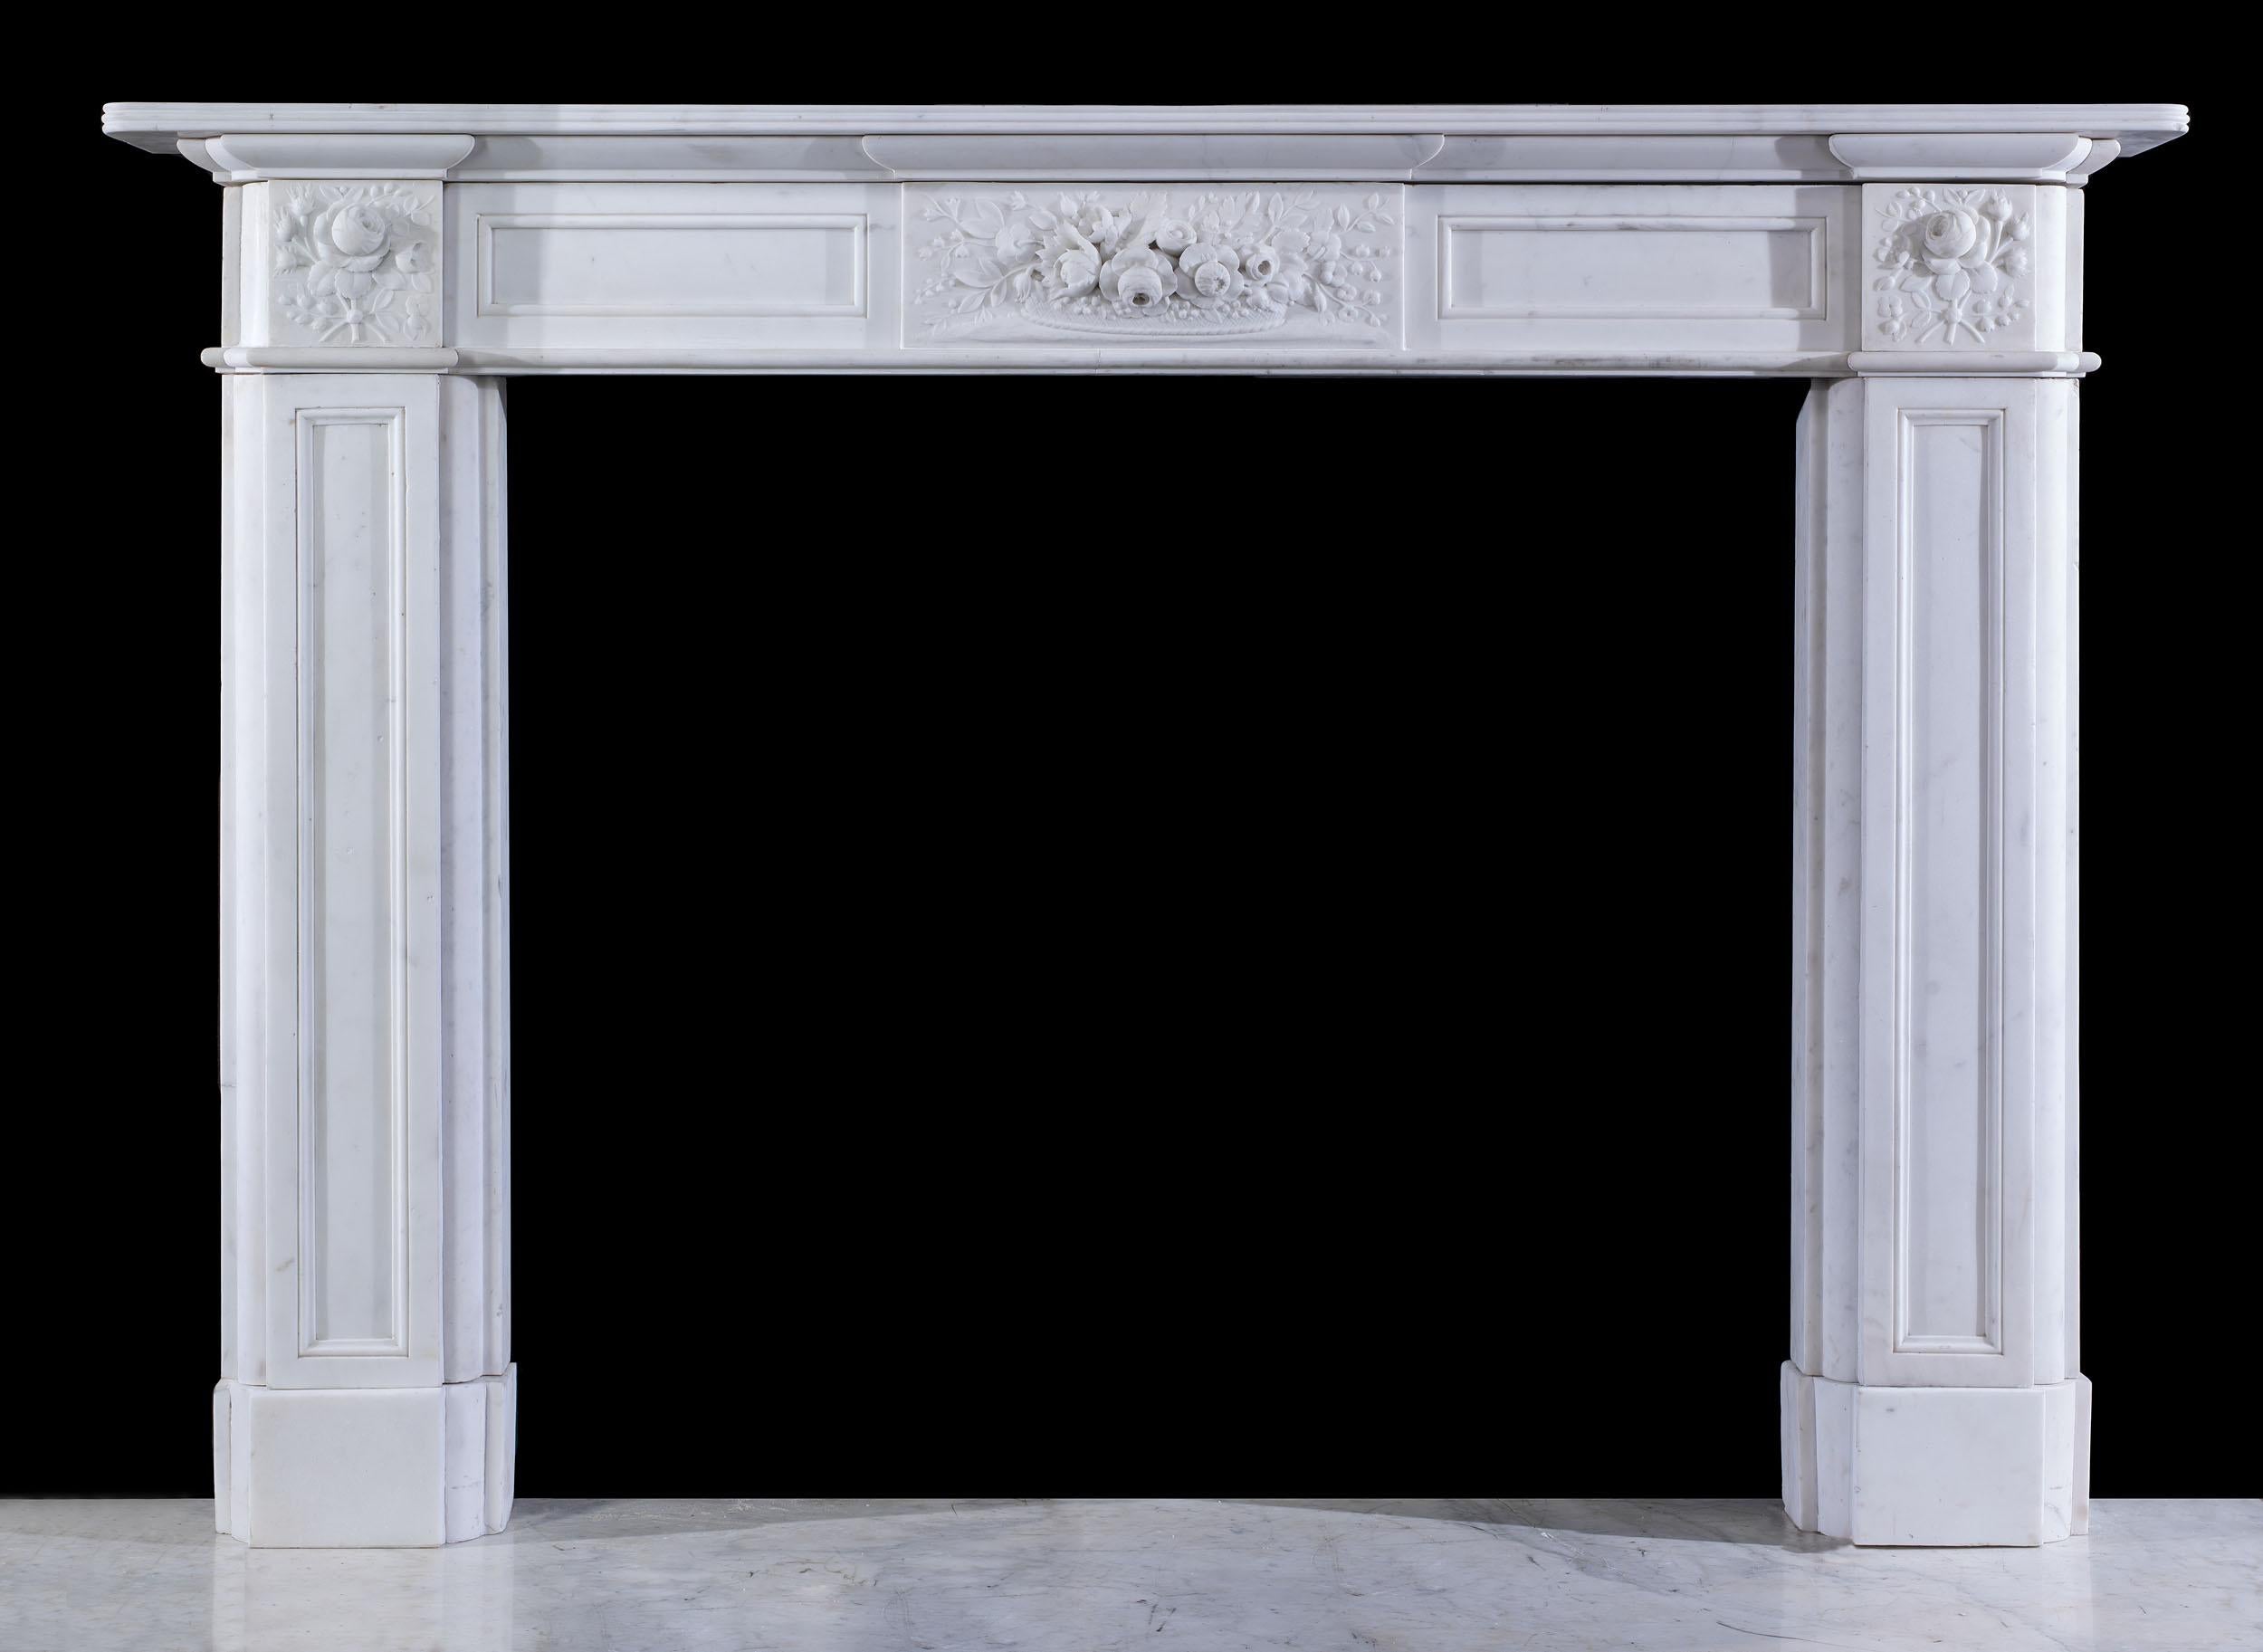 19th Century Antique Regency Floral White Marble Fireplace